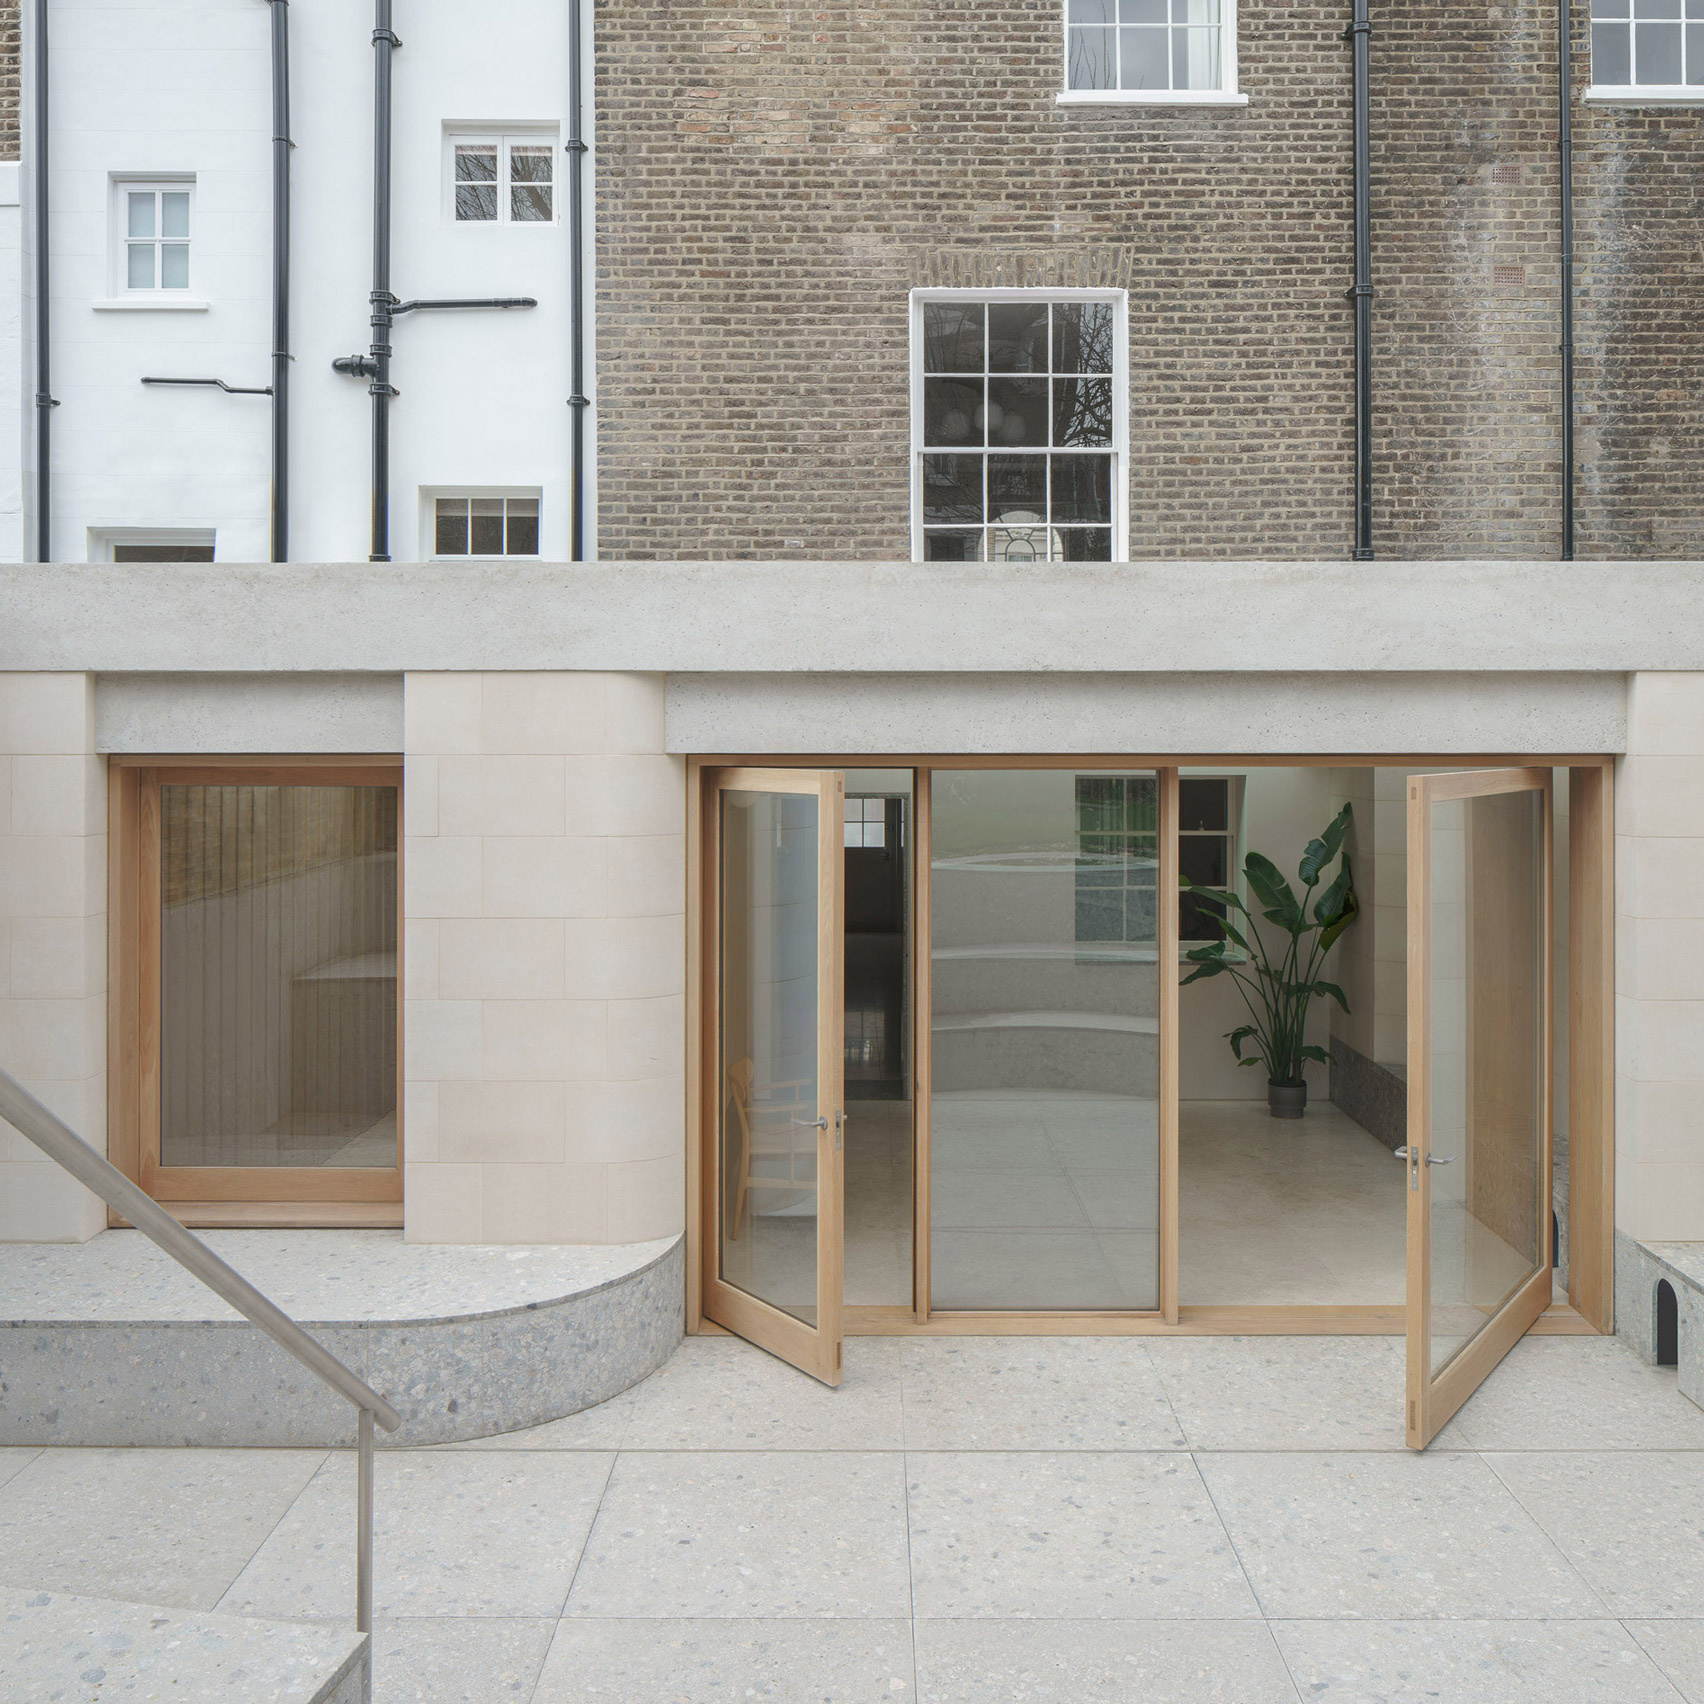 Stone House made from limestone by Architecture for London